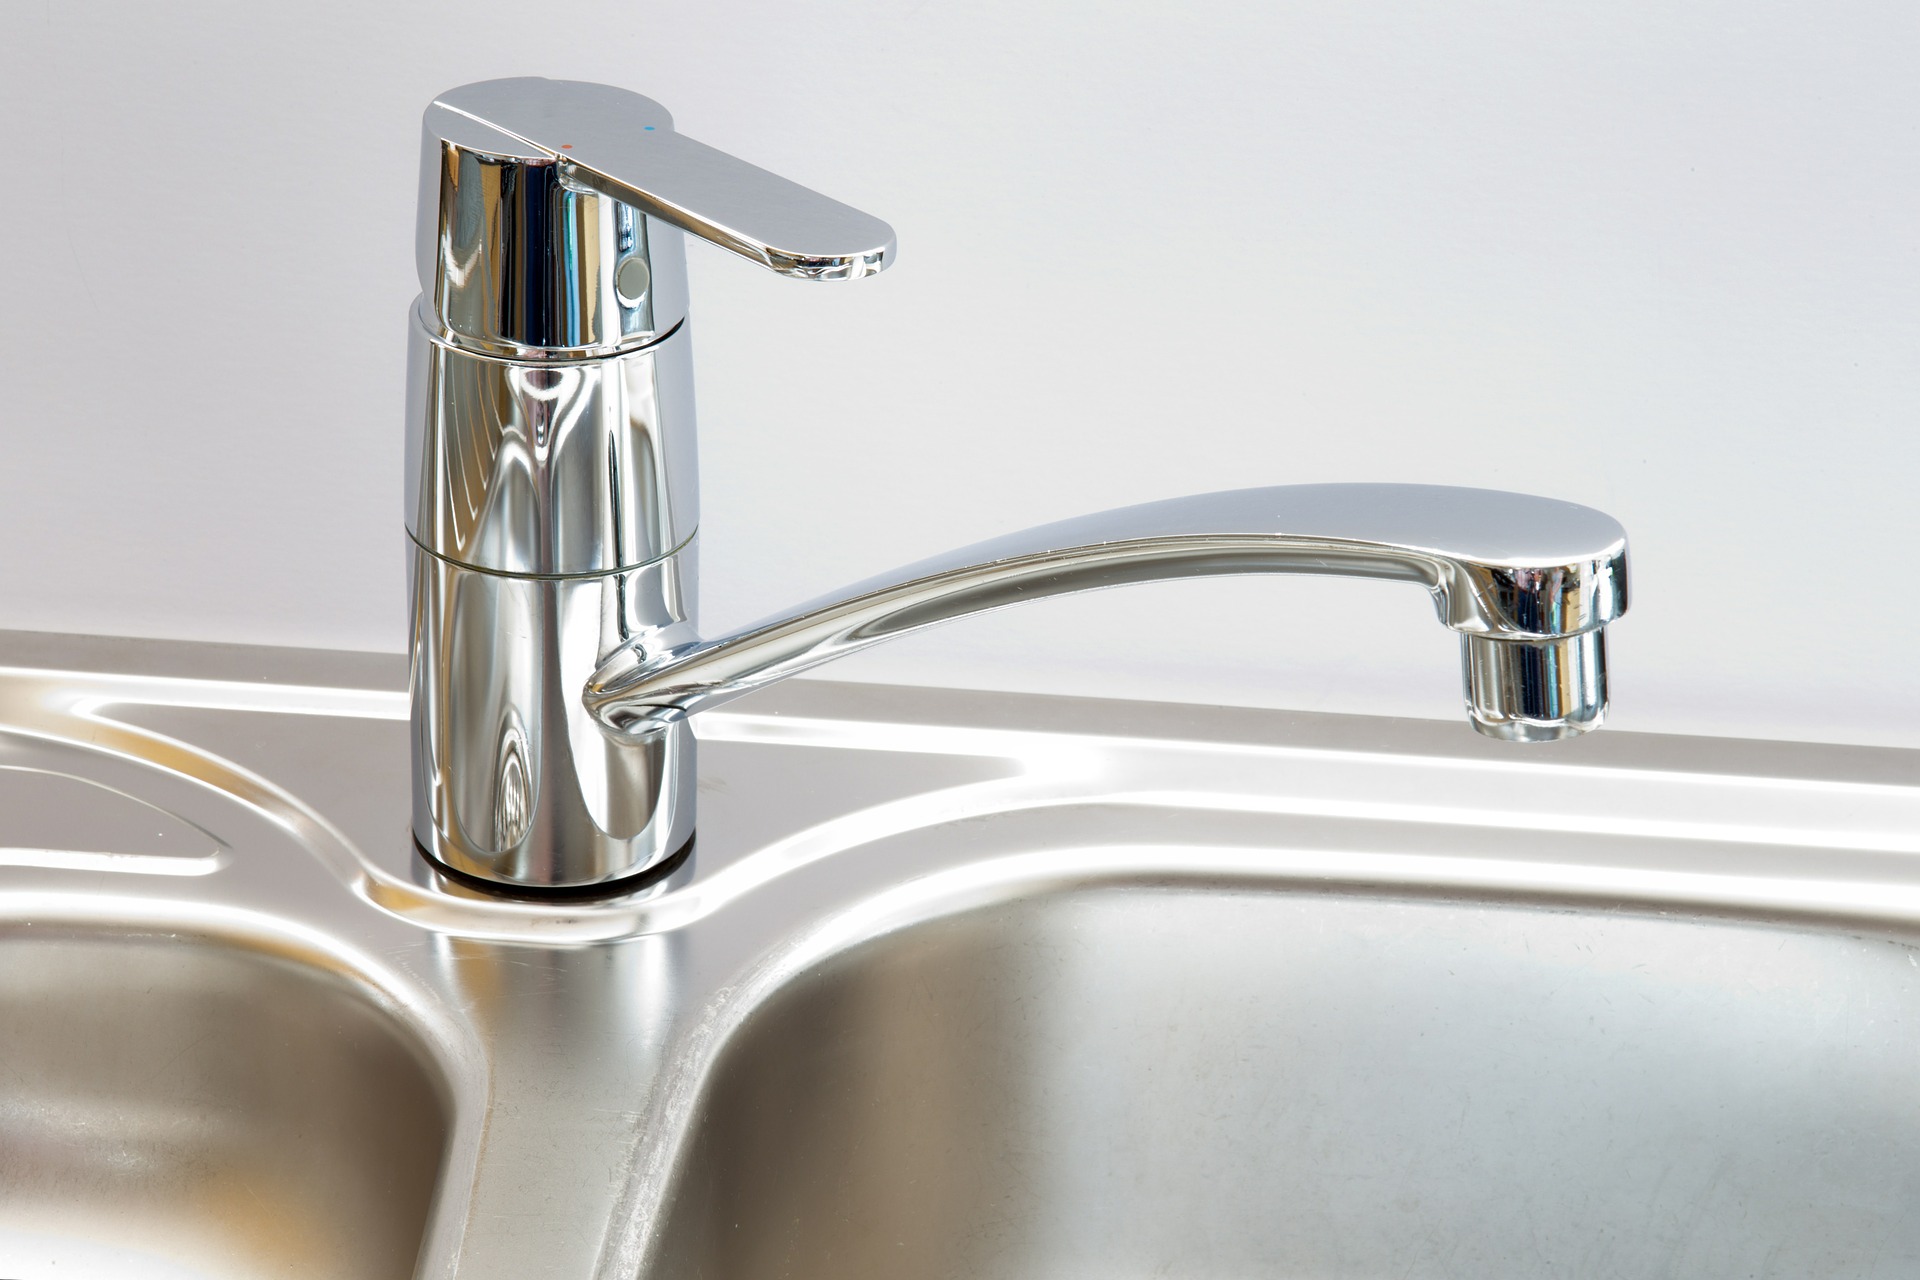 Hard Water vs Soft Water, Water Issues, Is Hard Water Bad For You?